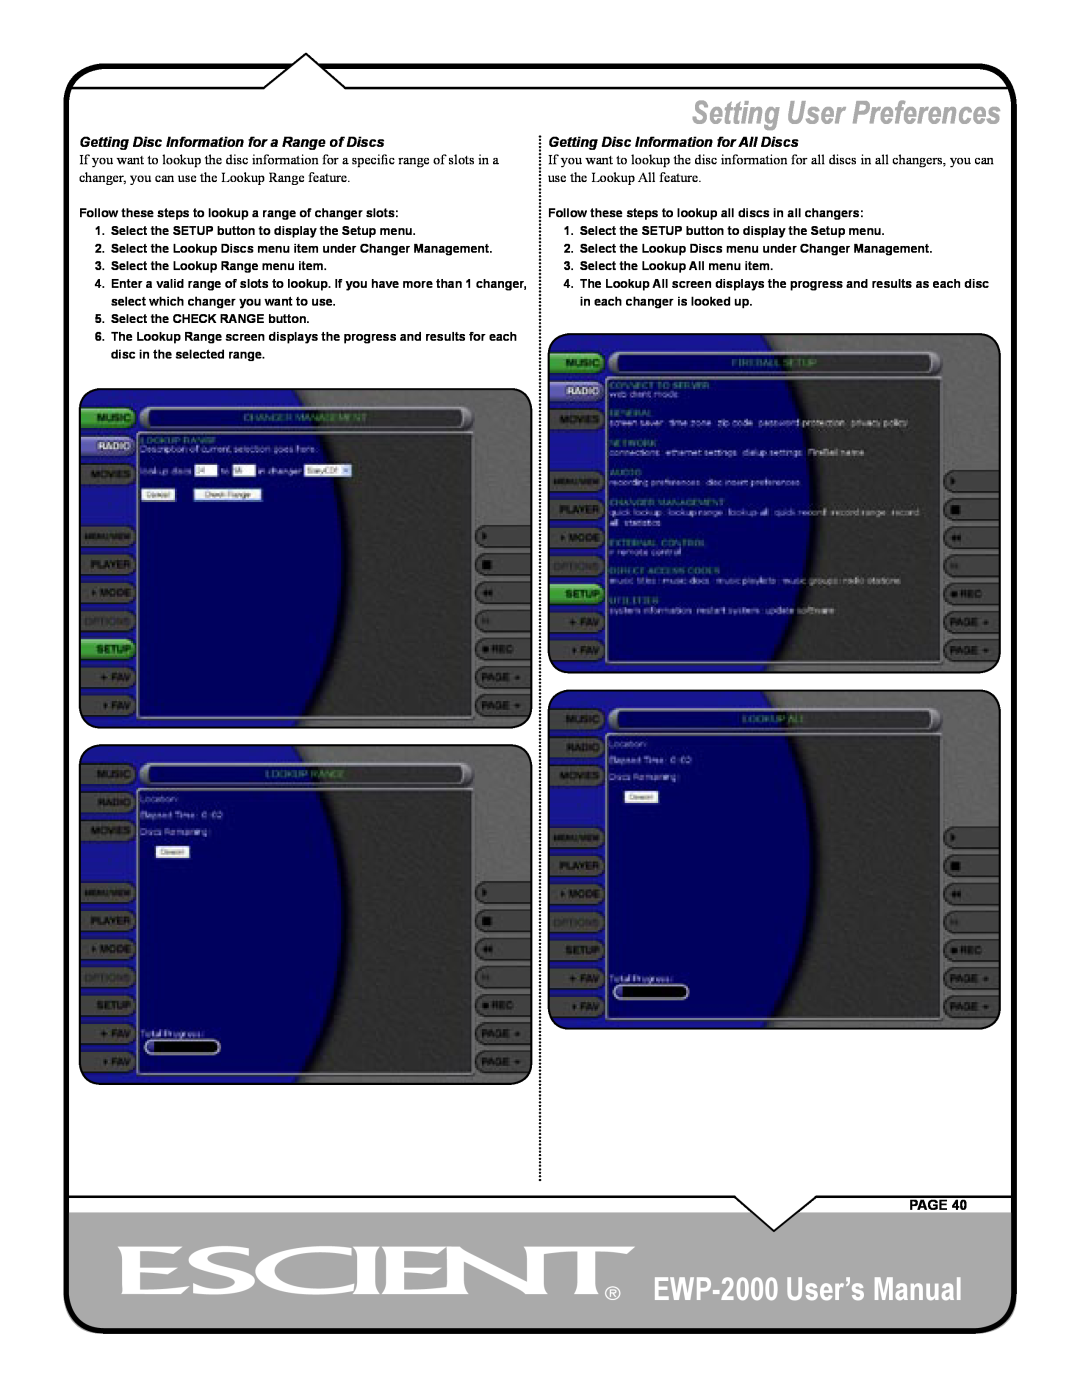 Escient Setting User Preferences, EWP-2000 User’s Manual, Getting Disc Information for a Range of Discs, Page 